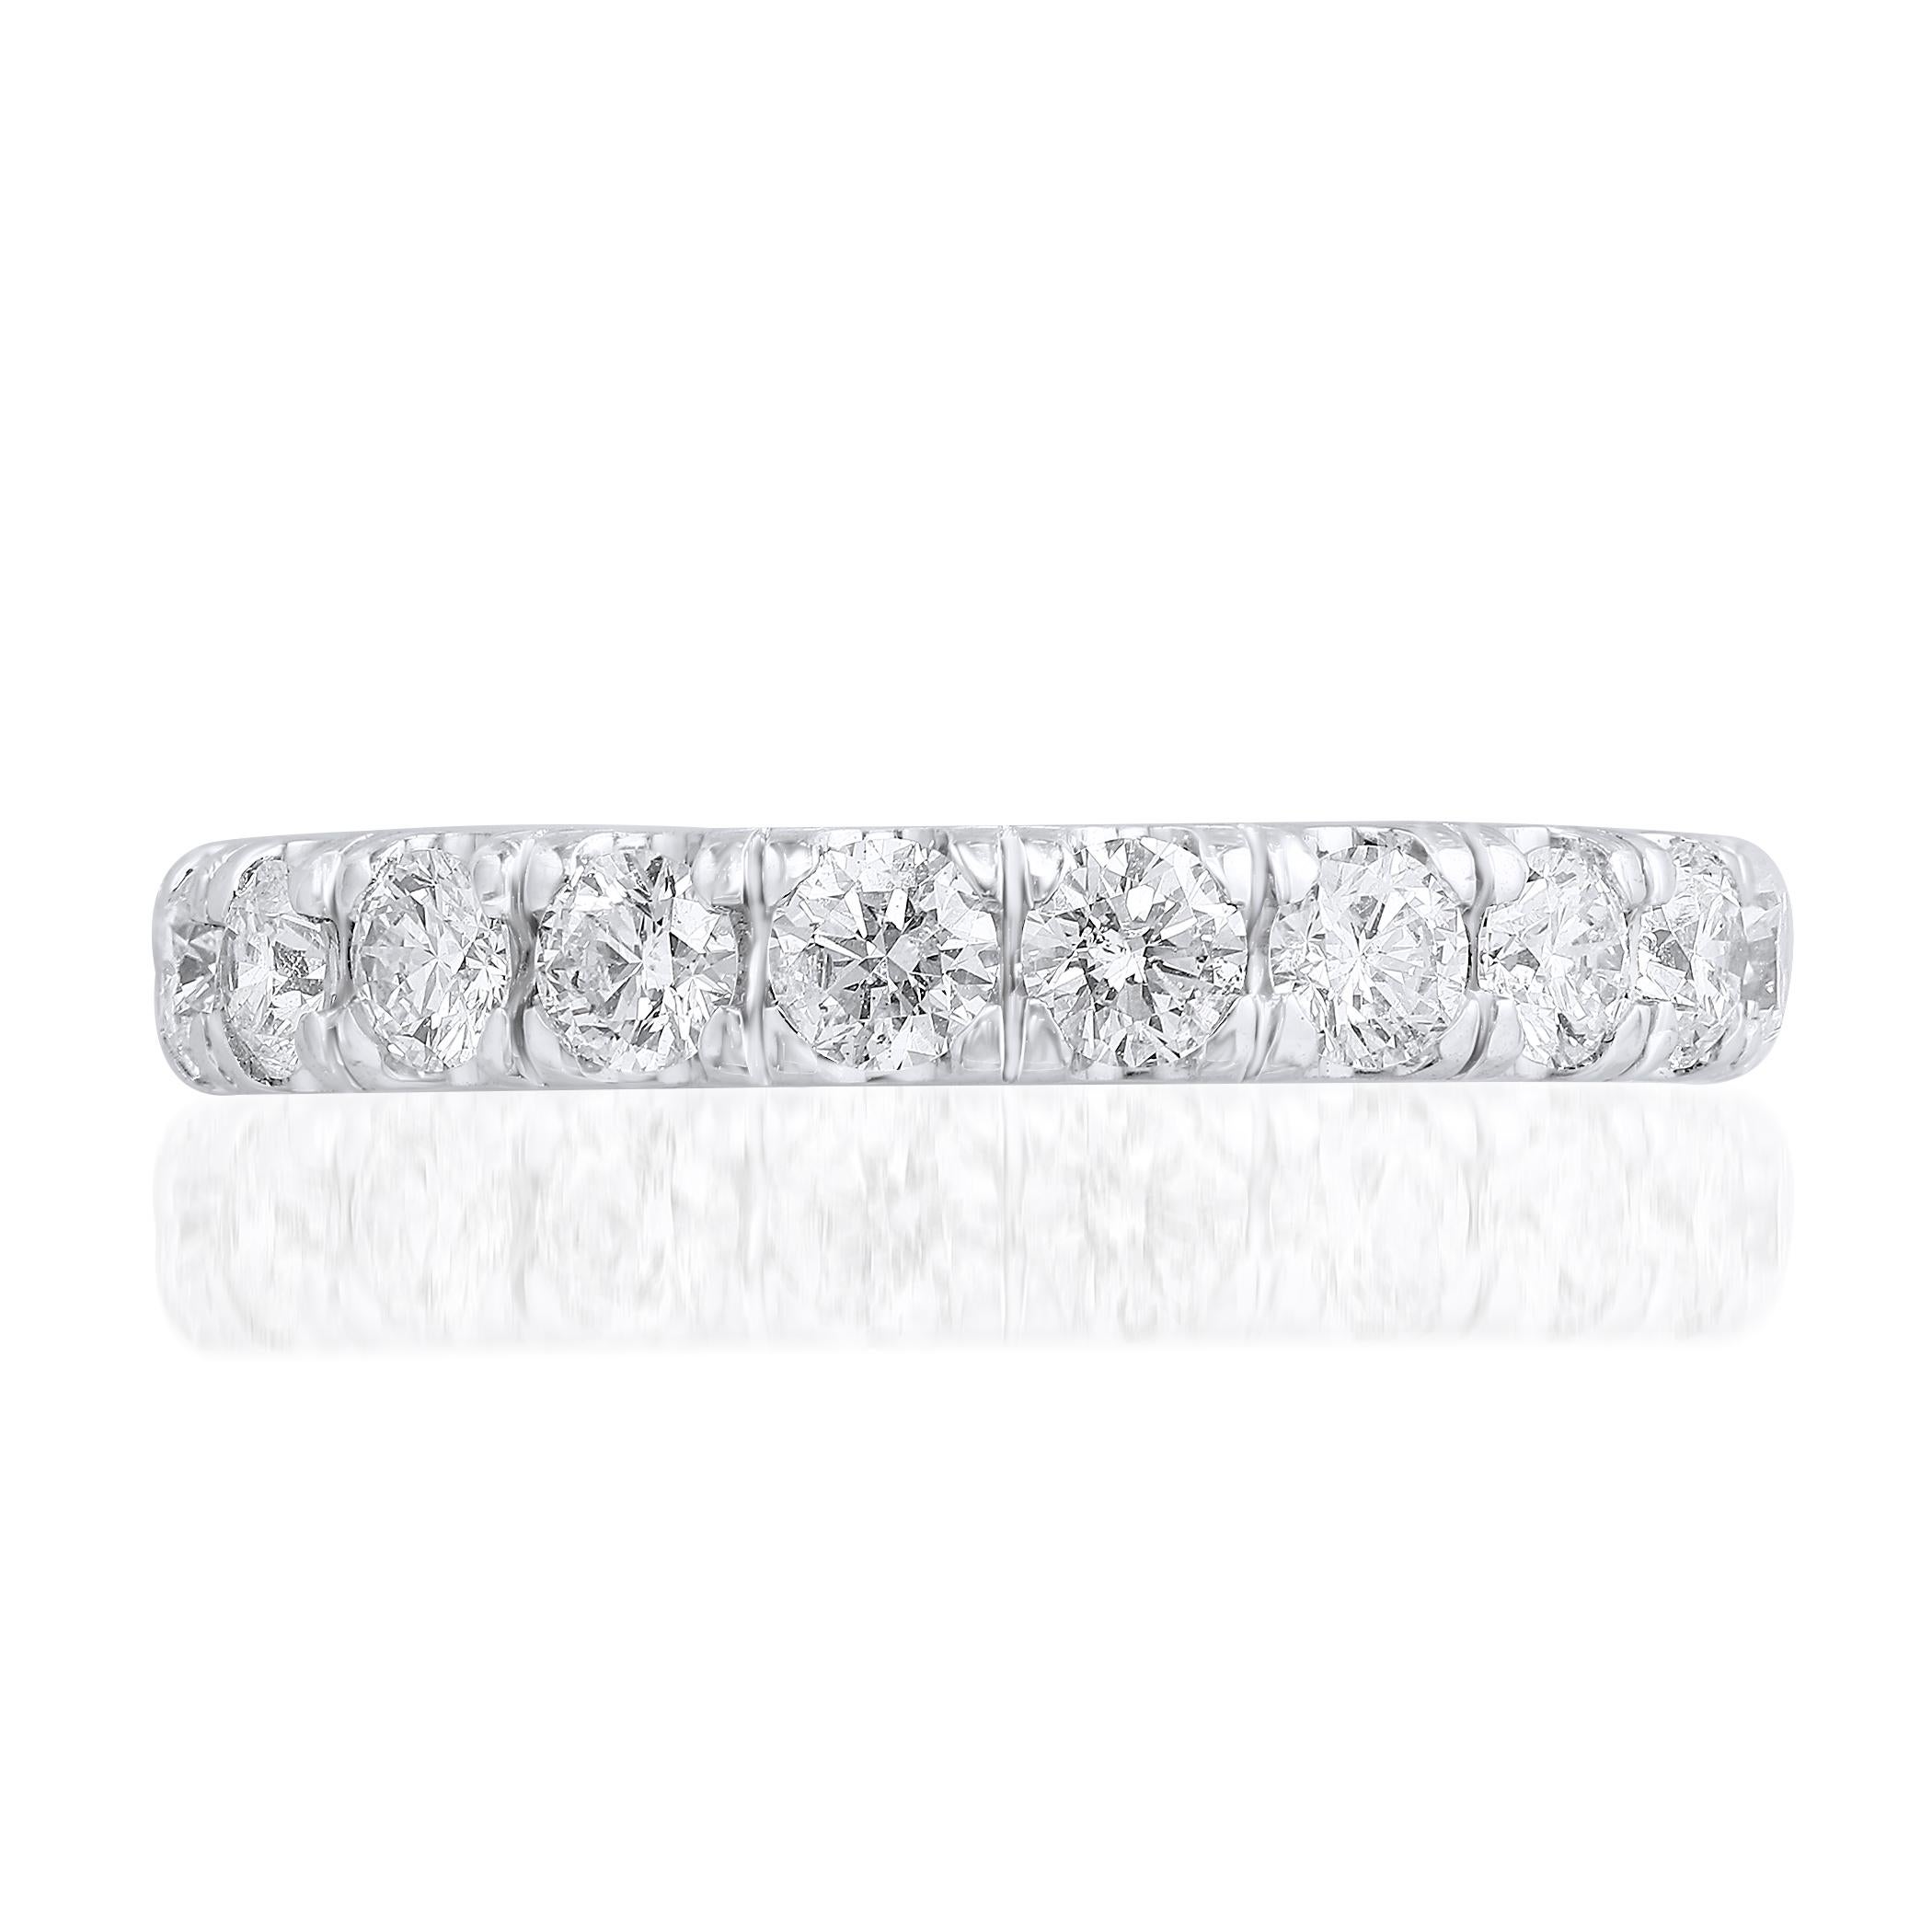 A classic and timeless eternity band style showcasing a row of round brilliant diamonds set in a 4 prong 14K white gold mounting. 20 Diamonds weigh 1.94 carats. Size 6.5 US.

Style available in different price ranges. Prices are based on your